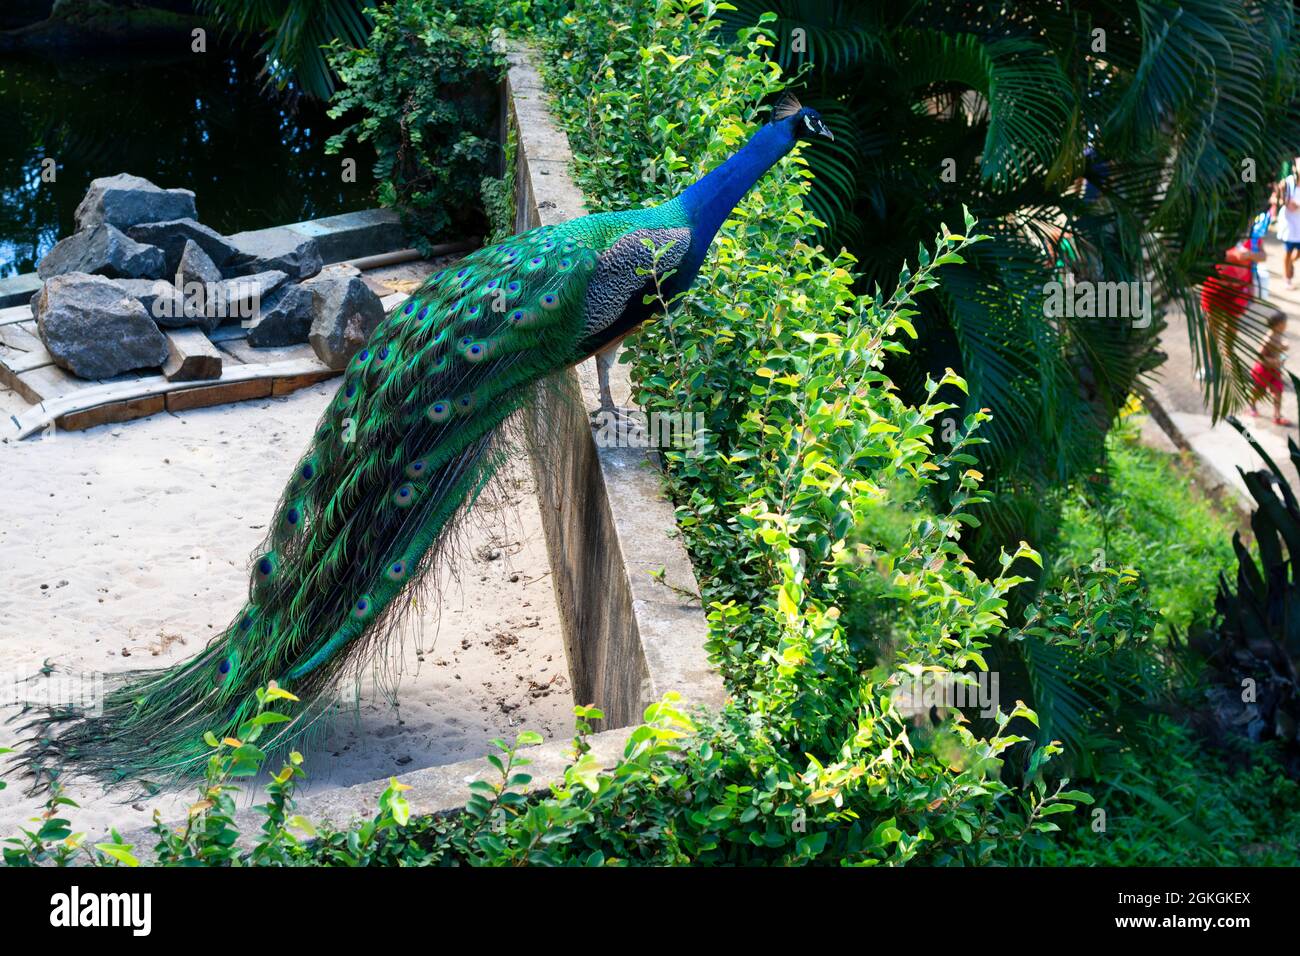 https://c8.alamy.com/comp/2GKGKEX/colorful-peacock-exhibiting-at-the-zoo-in-salvador-bahia-brazil-the-birds-of-the-genus-pavo-and-afropavo-of-the-pheasant-family-are-called-peacock-2GKGKEX.jpg